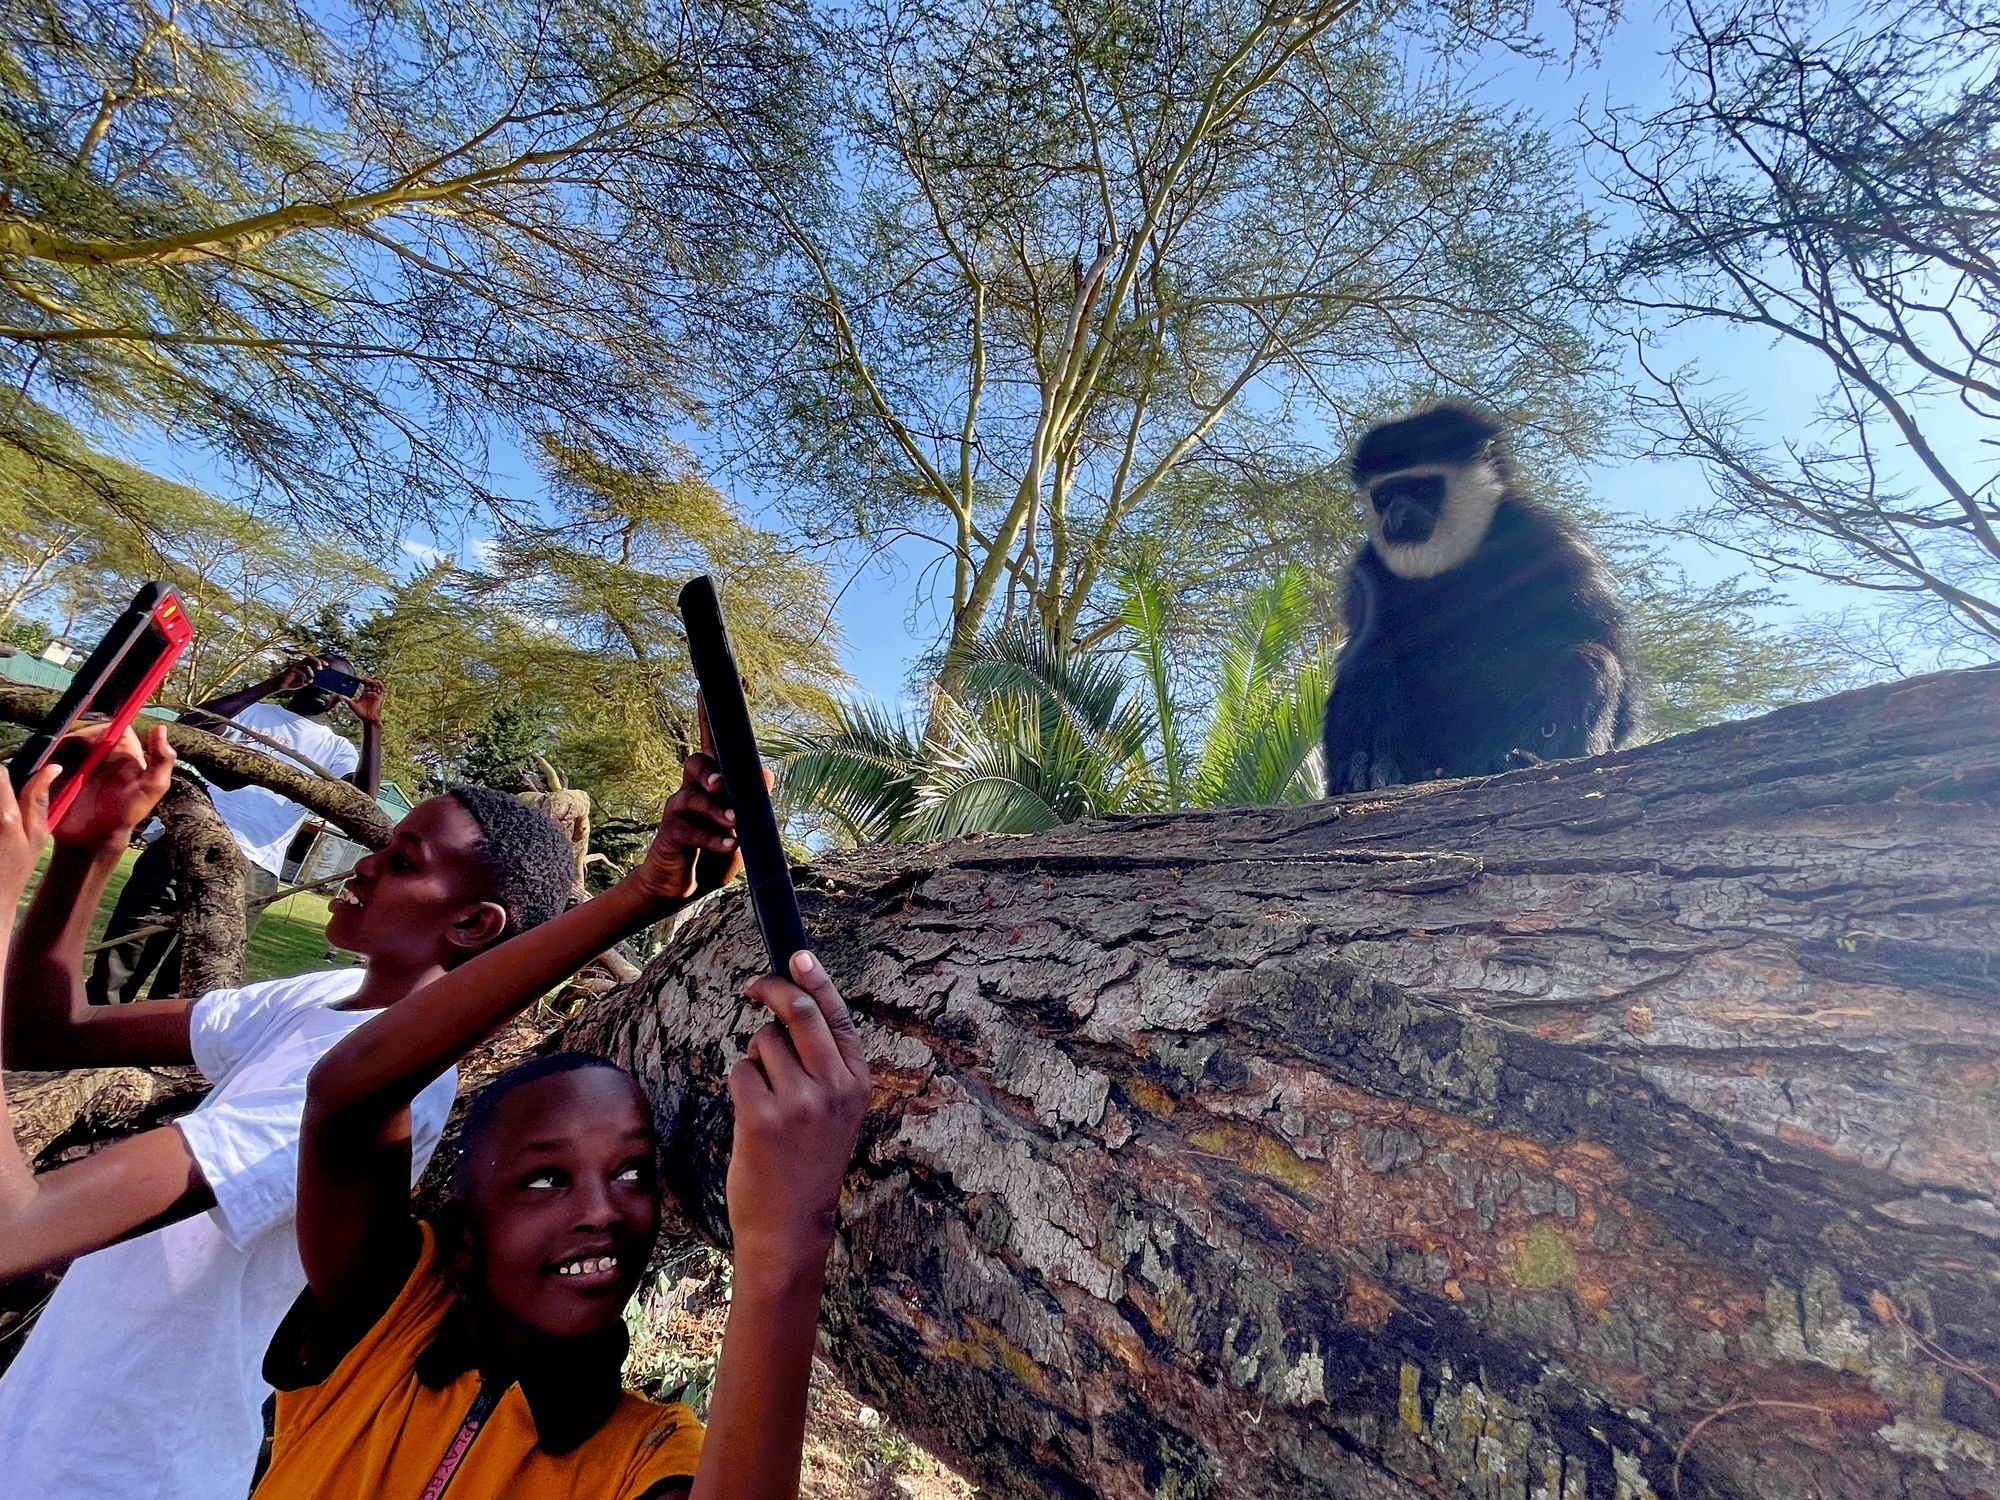 children using iPads to photograph a colobus monkey on a log